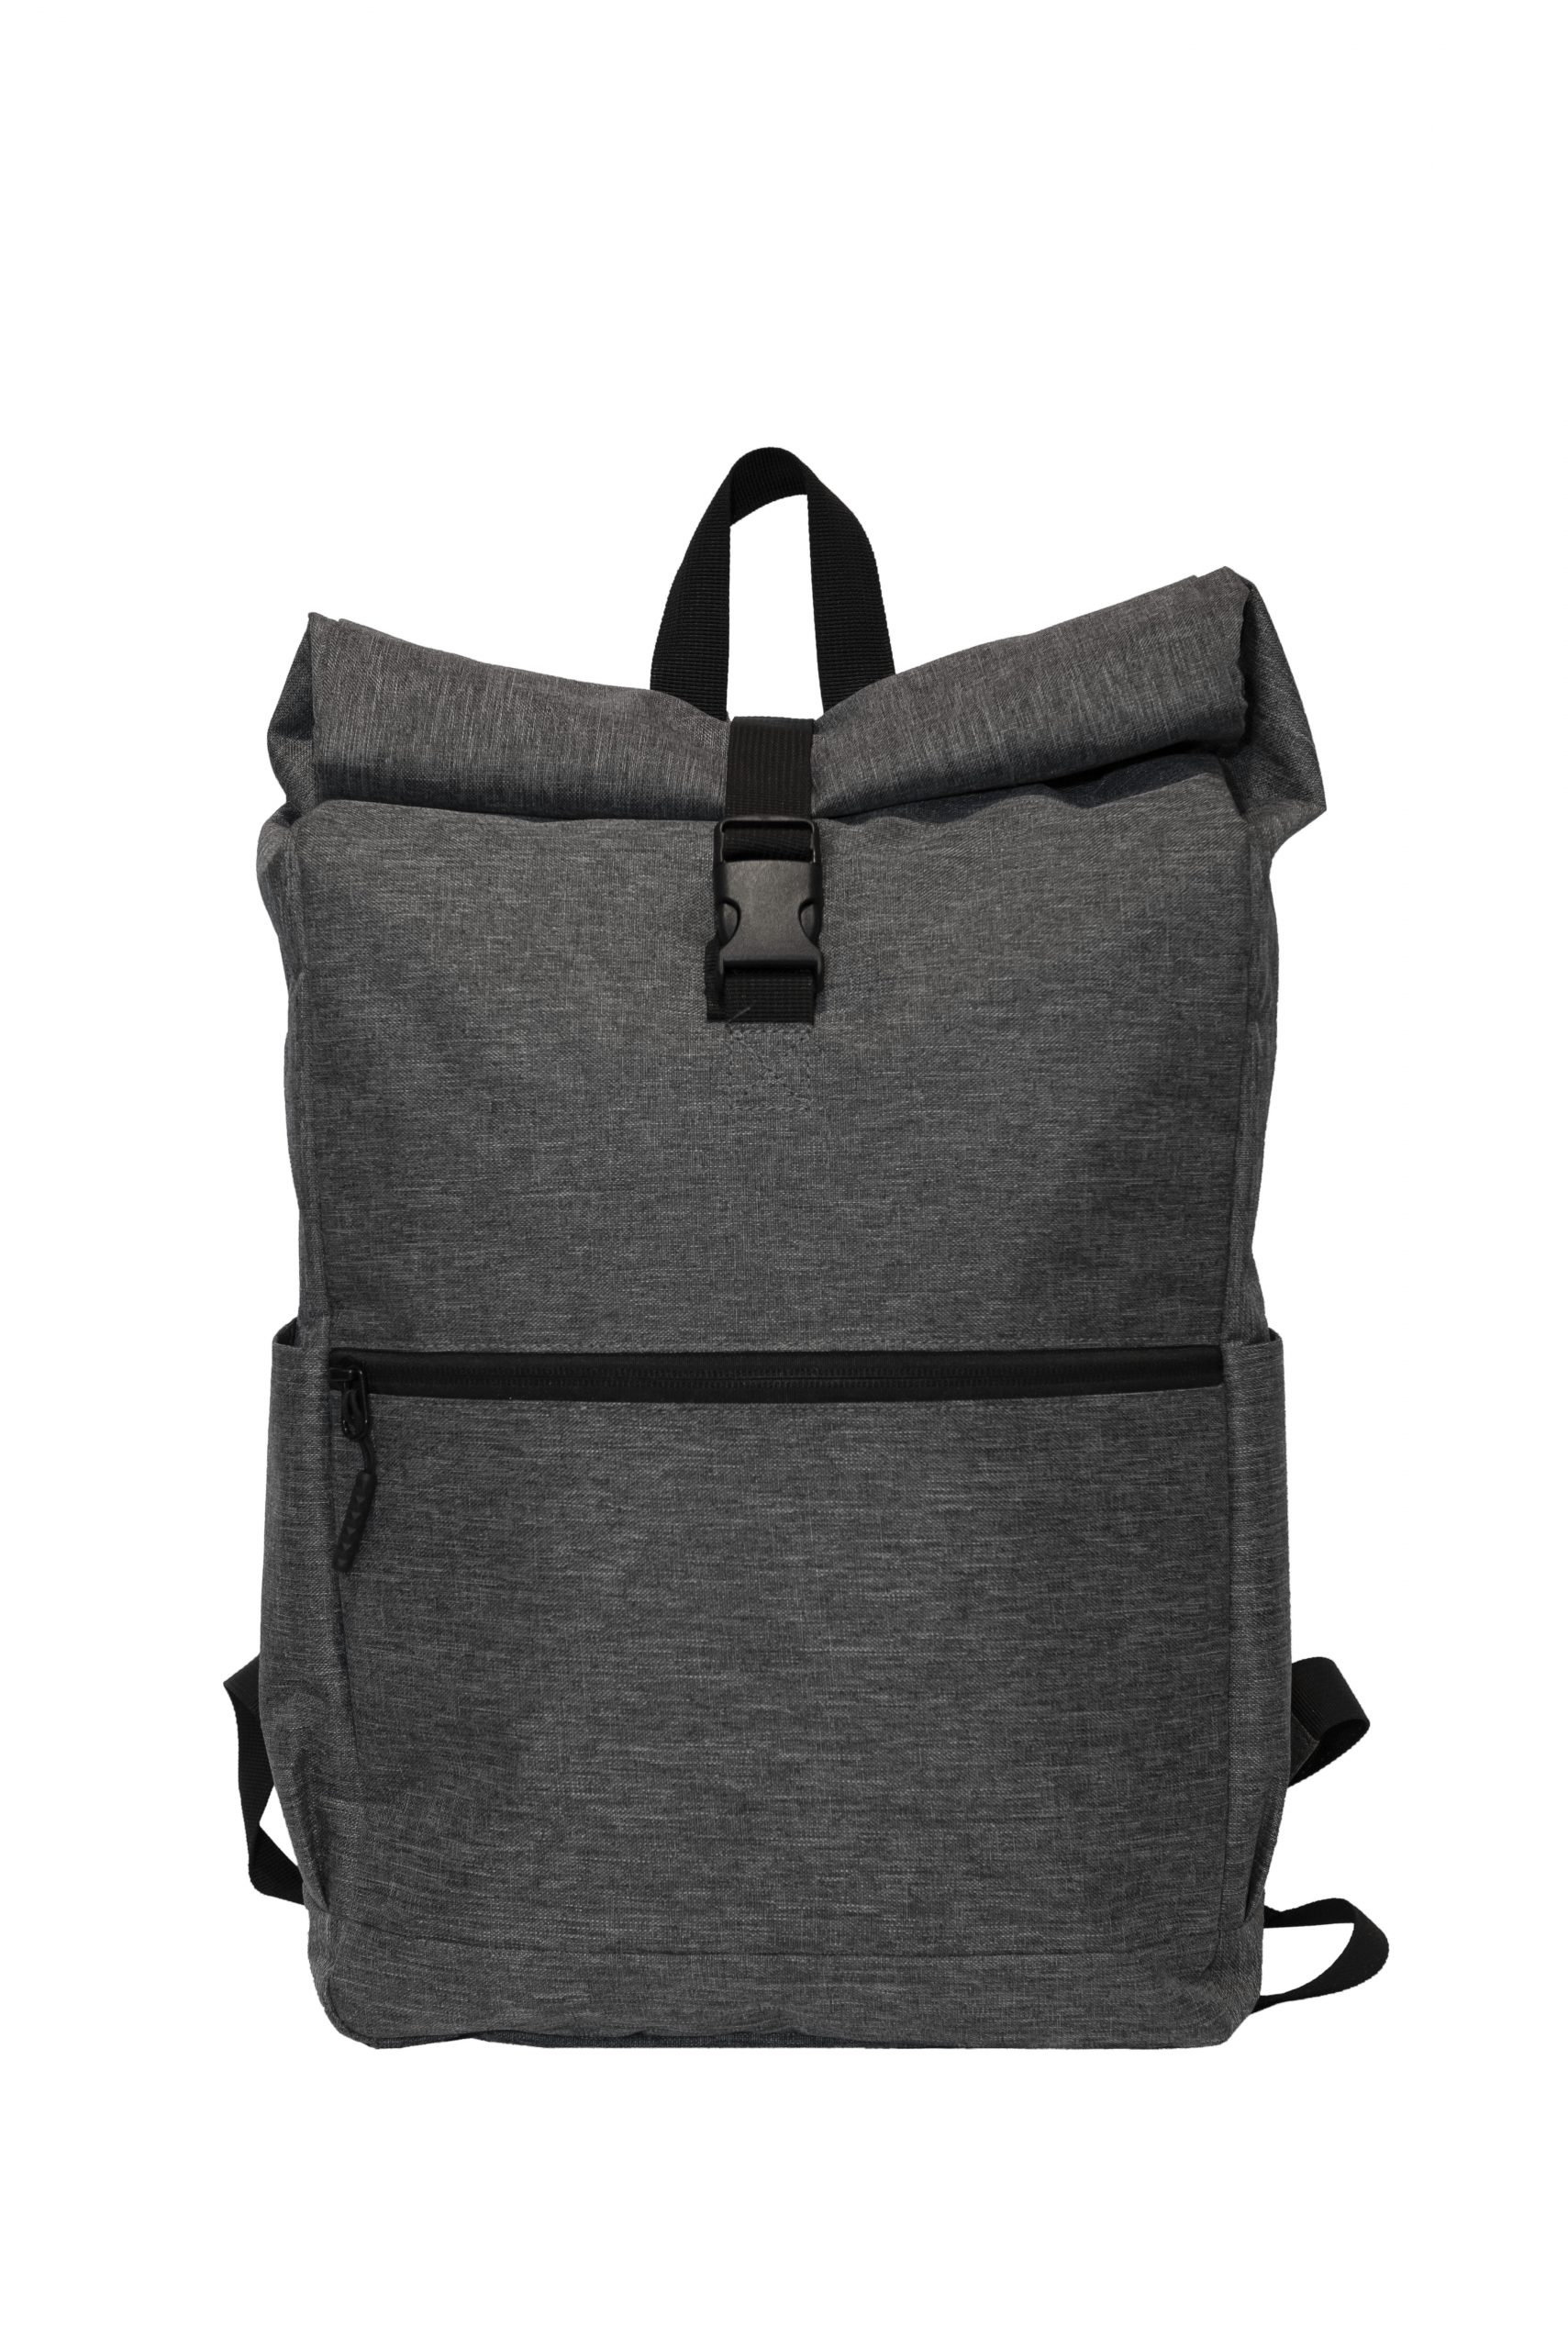 Straw Hat Crew Rolltop Backpack